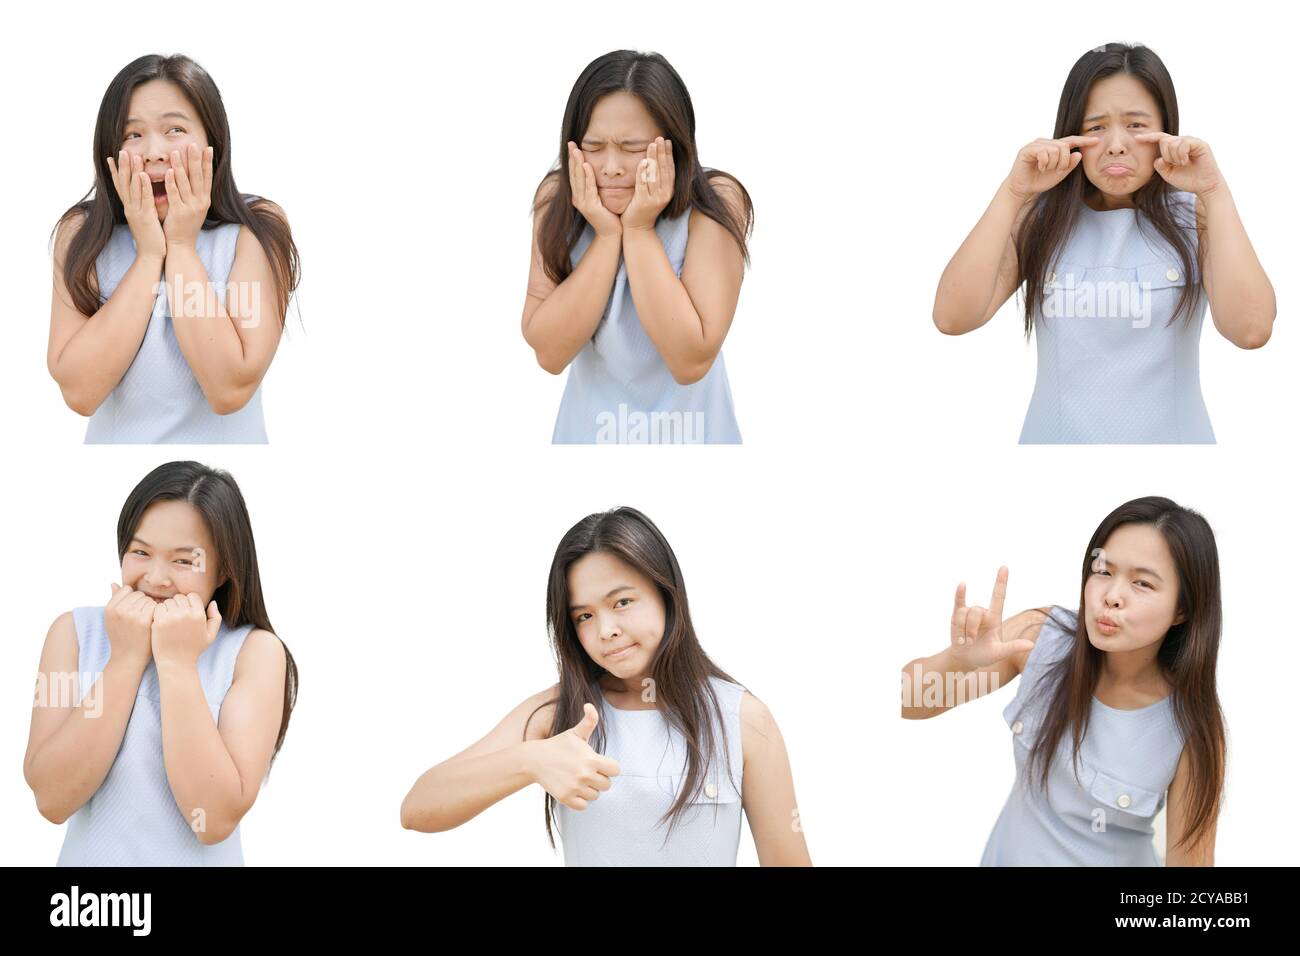 White-background isolated woman emotions set images with different facial expressions and body language in both positive and negative emotions by Stock Photo